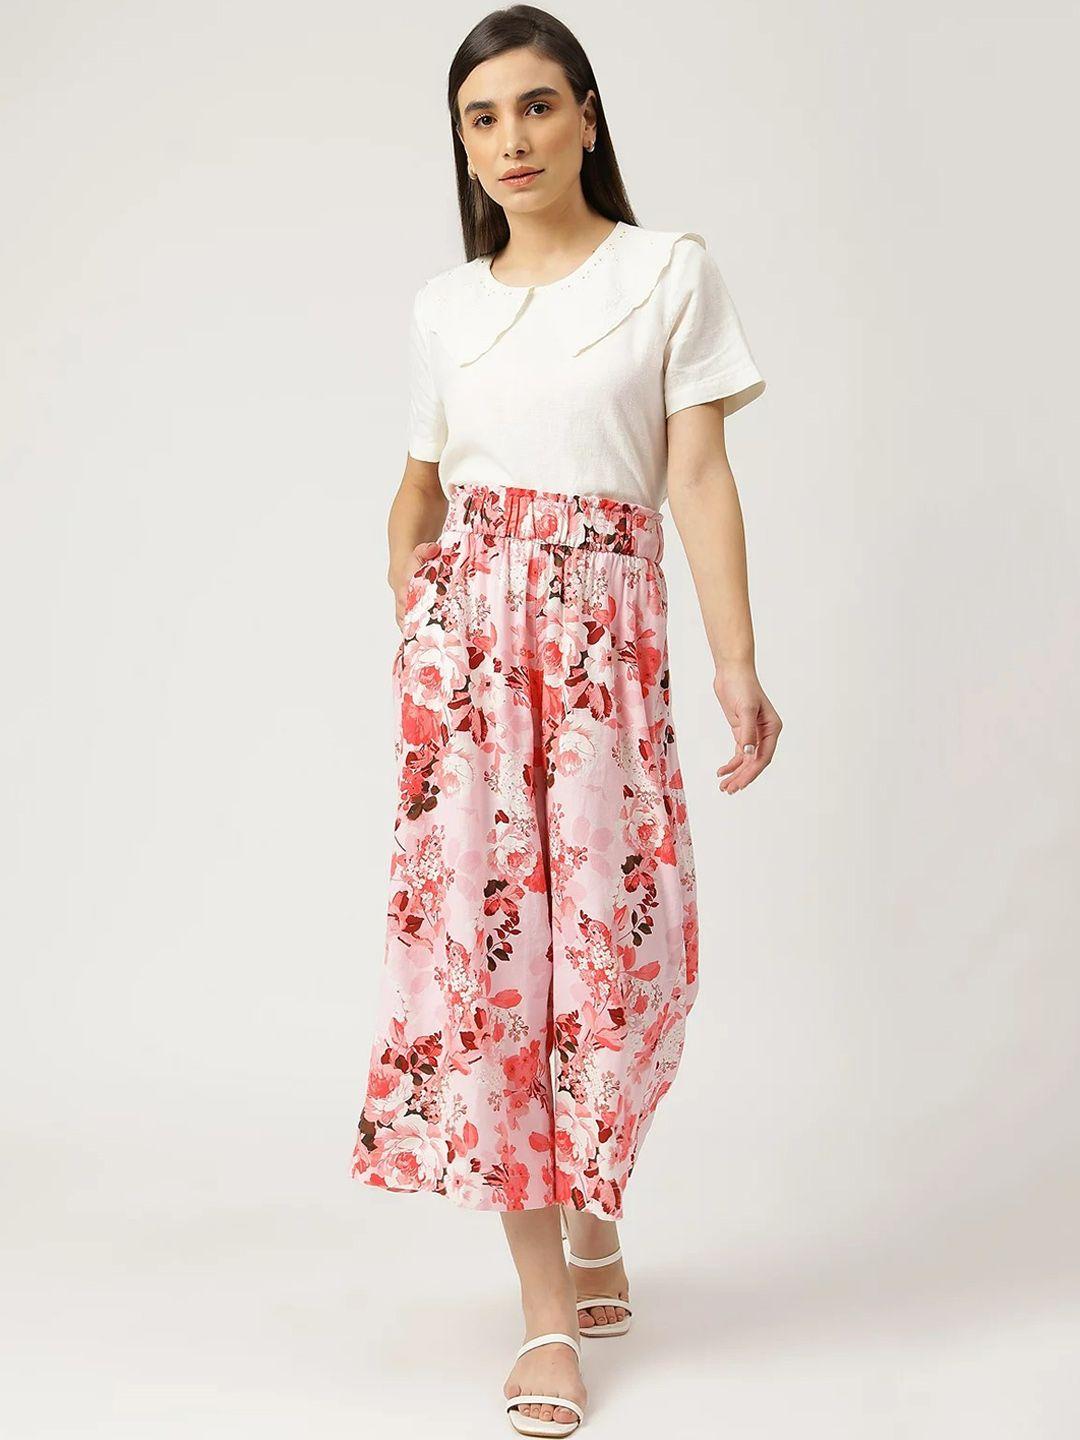 marks-&-spencer-women-pink-floral-printed-high-rise-pleated-culottes-trouser